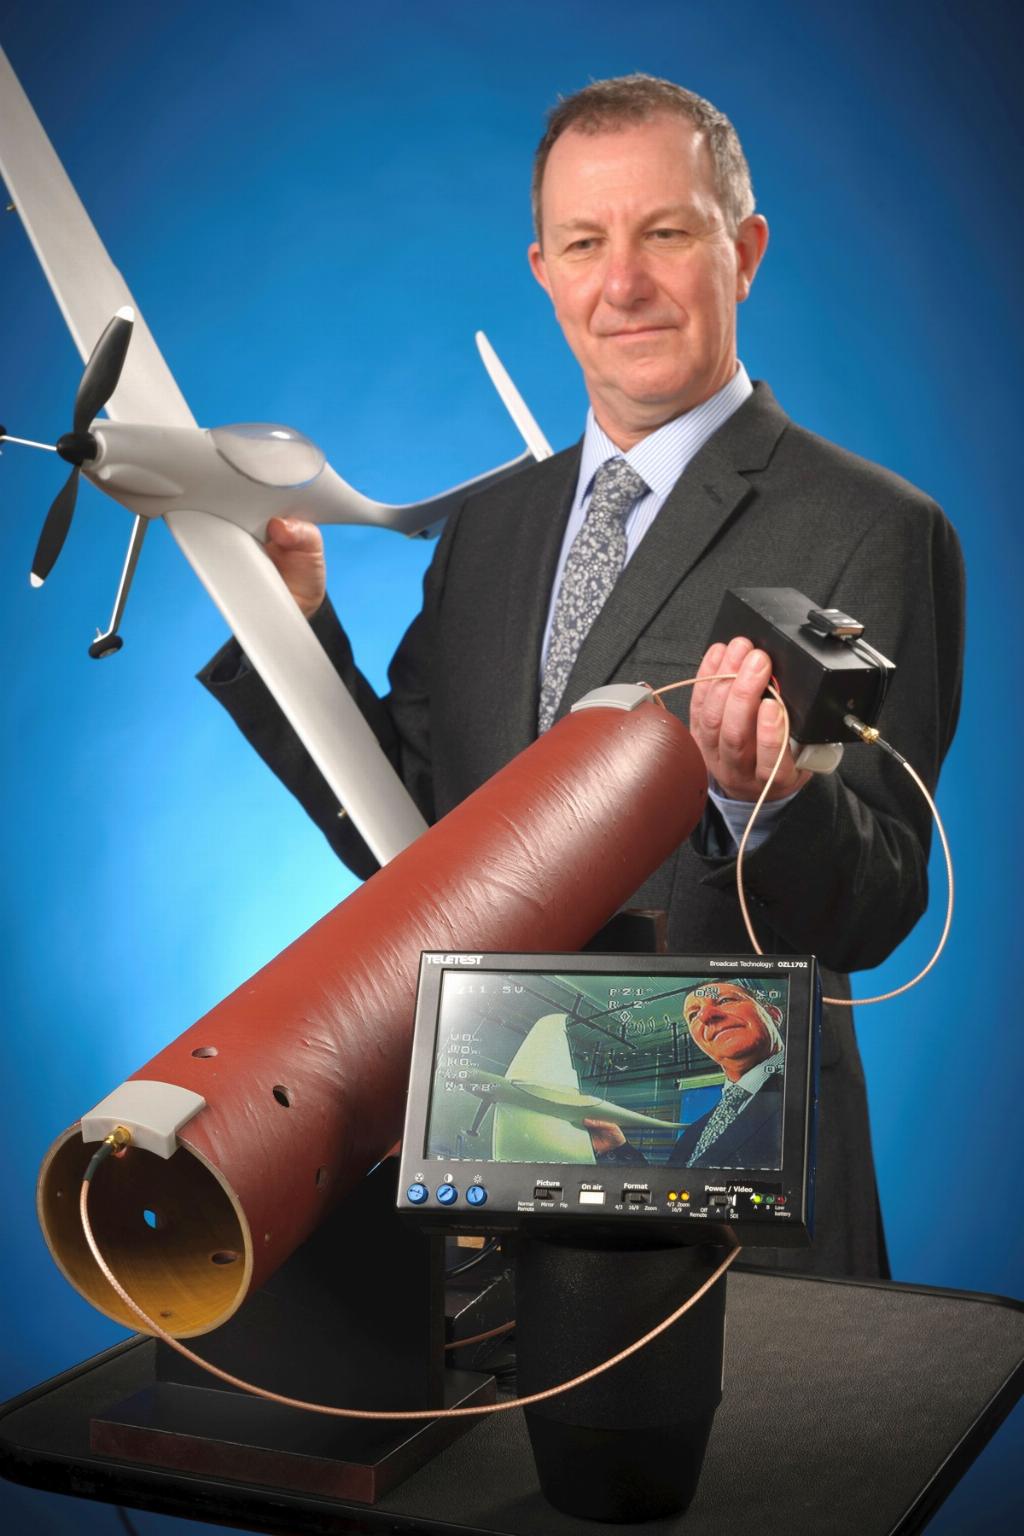 Paul Burling holds a composite tube through which a video is being transmitted using SurFlow electronics